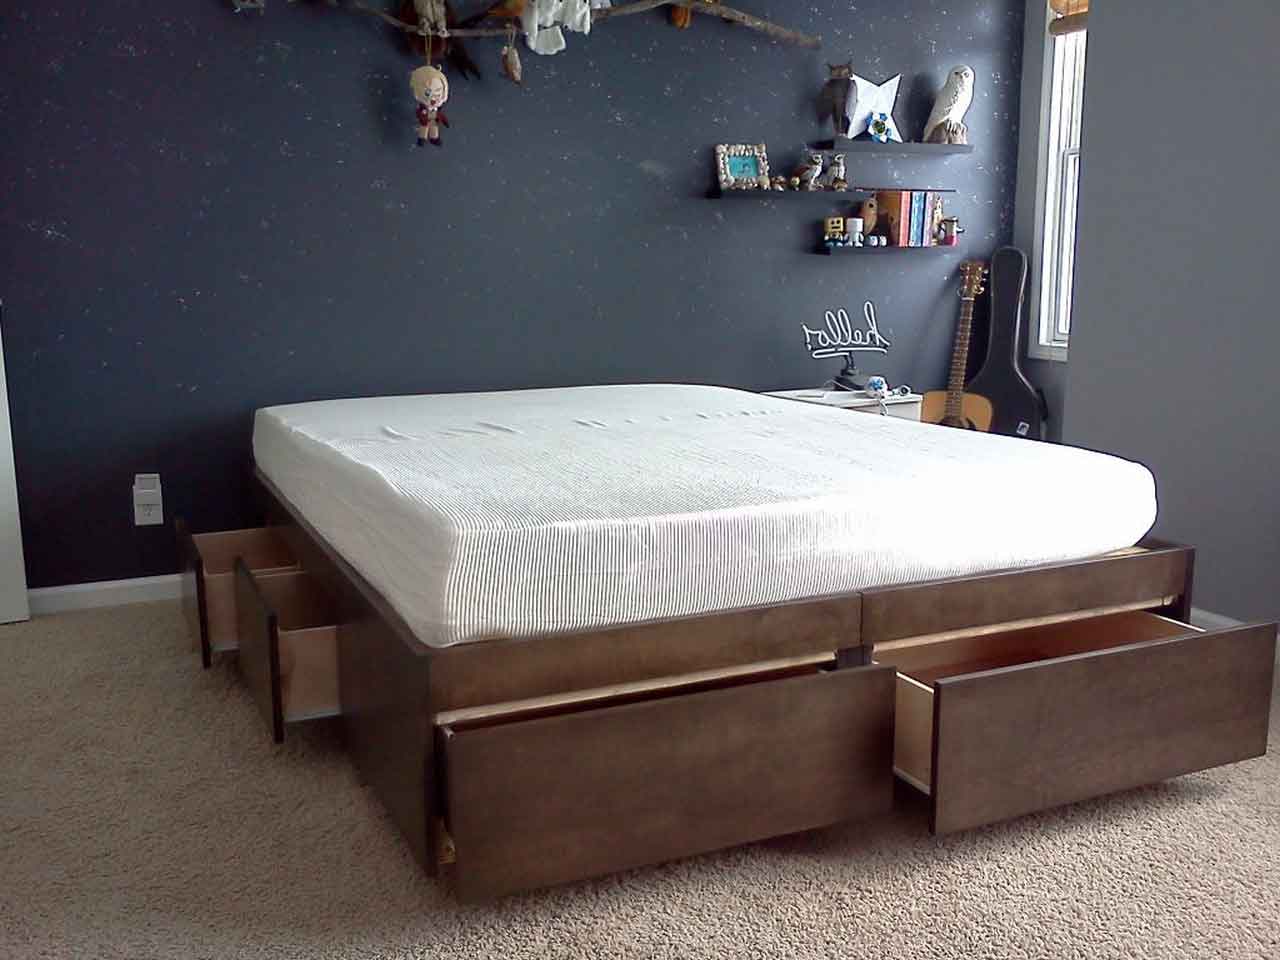 Get to Know How to Build Easy DIY Twin Bed Frame with Storages | Roy Home Design